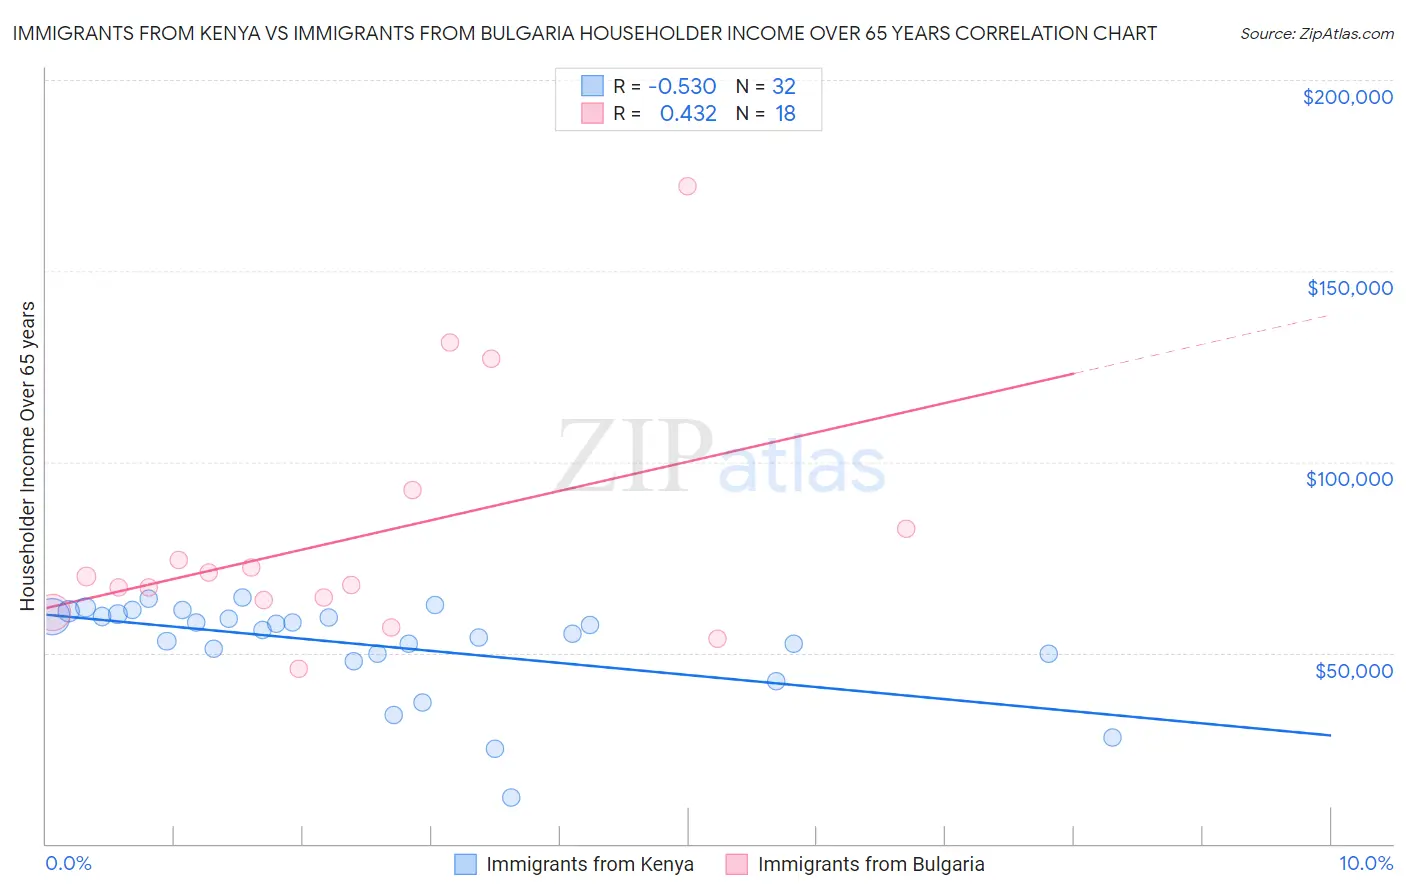 Immigrants from Kenya vs Immigrants from Bulgaria Householder Income Over 65 years